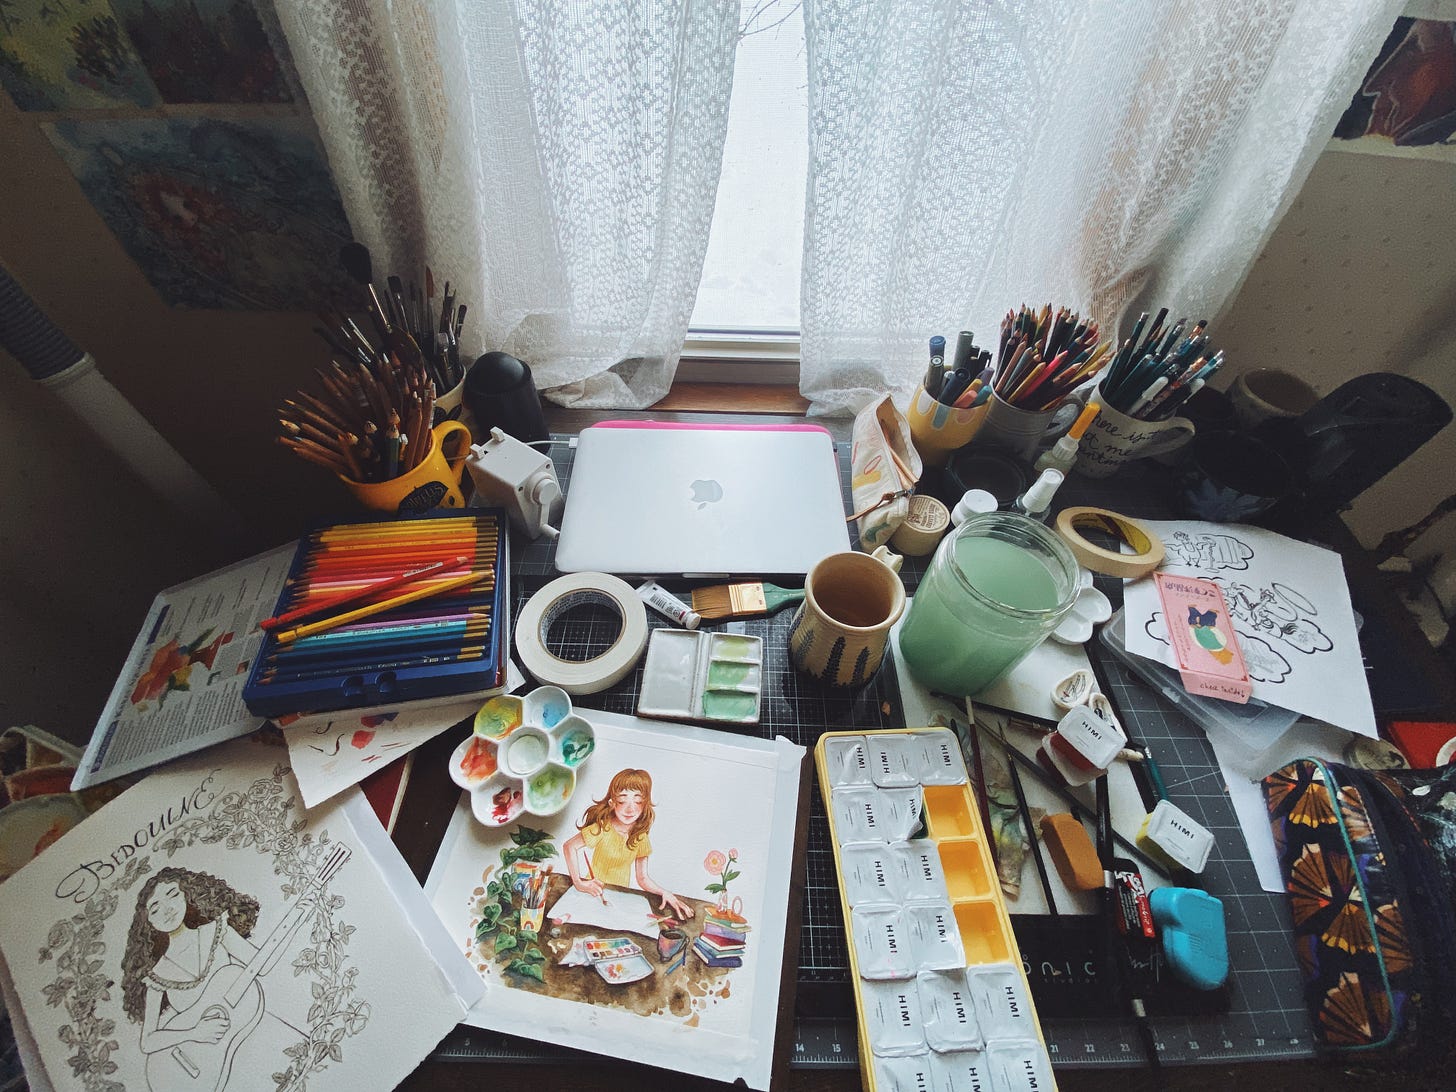 A photograph of the studio with art supplies scattered across a drawing table. Two incomplete illustrations are surrounded by the many pencils, paints, paintbrushes, and other materials.